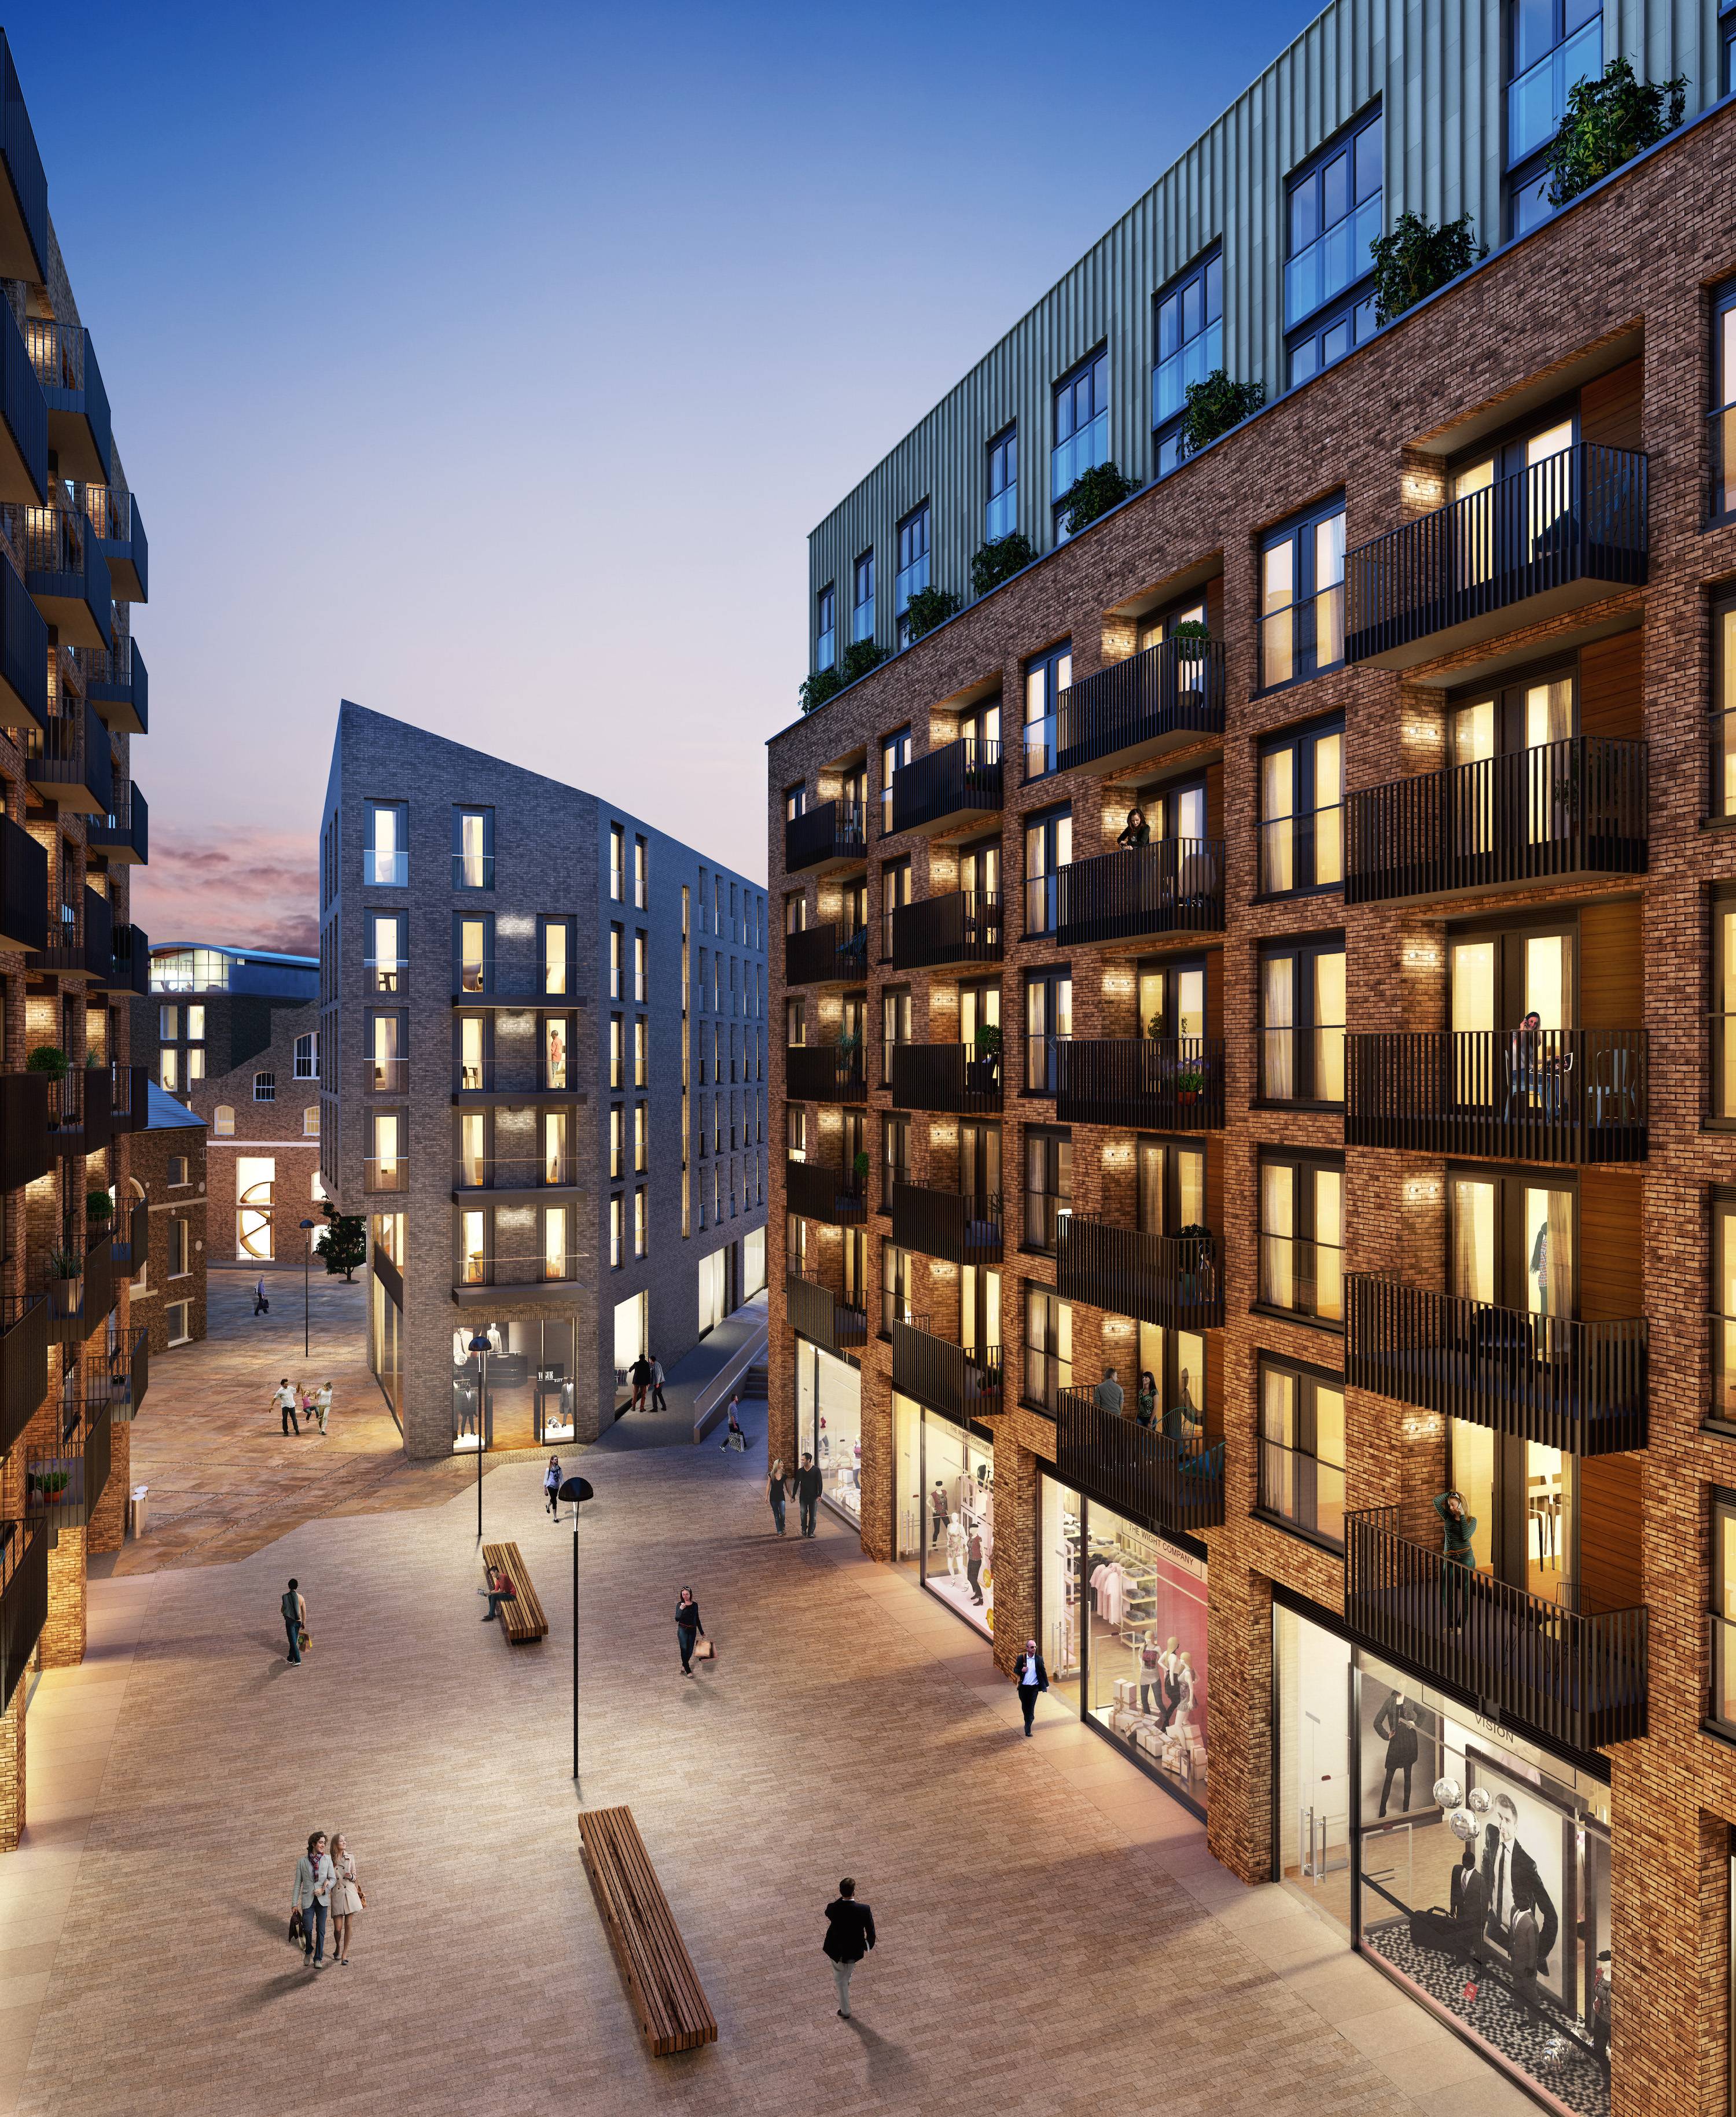 2 Bedroom Flat For Sale In Stunning New Build Apartments in The Ram Quarter,London, SW18